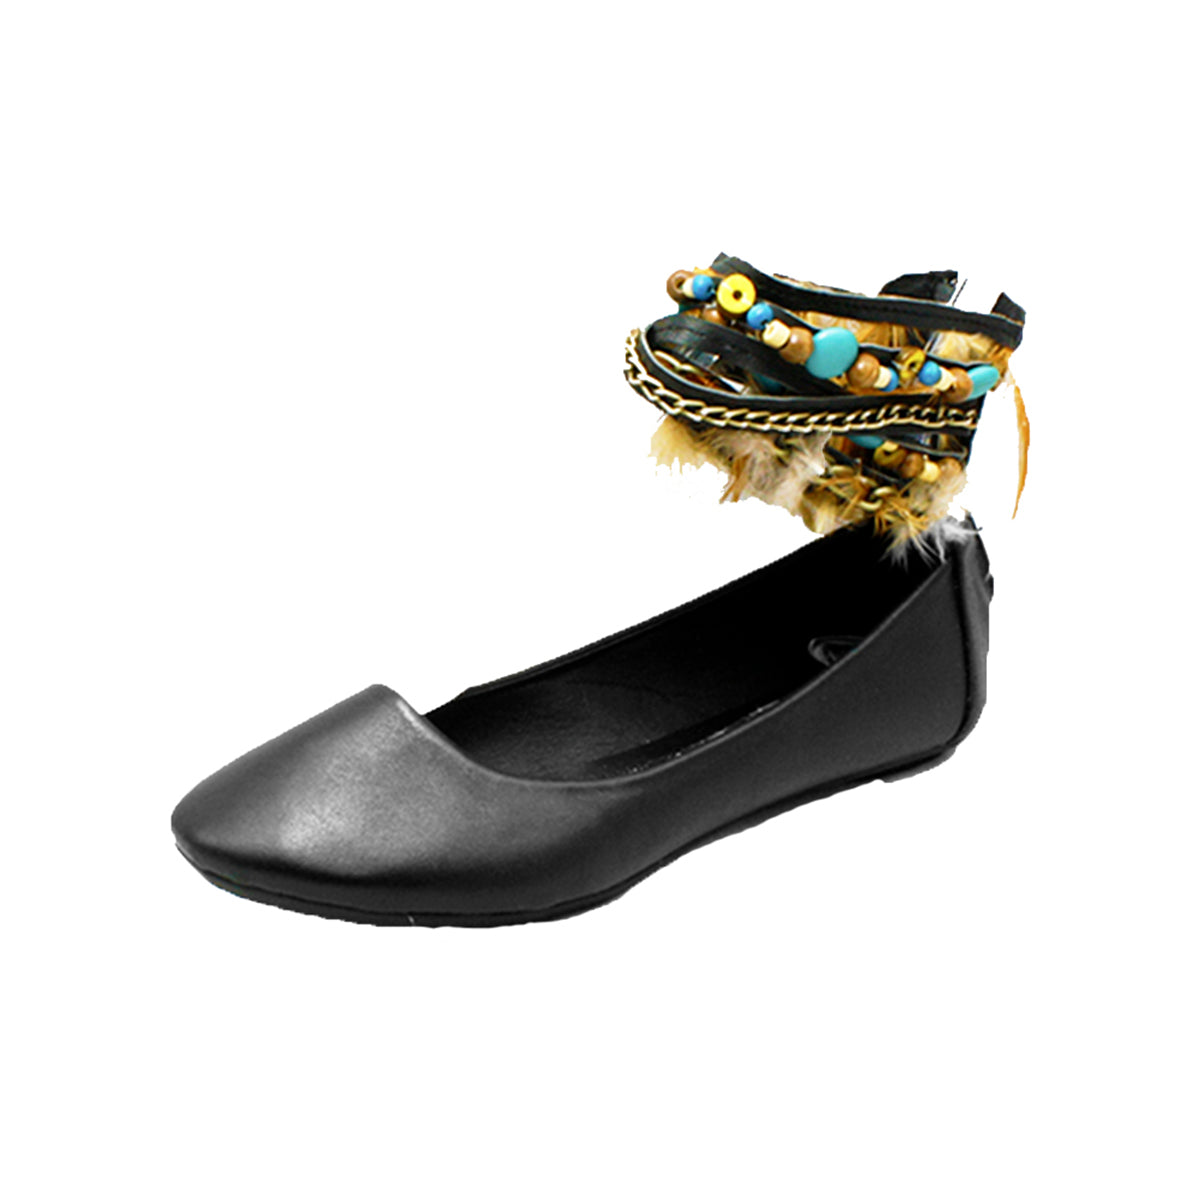 Black flat shoes / pumps with multiple ankle straps